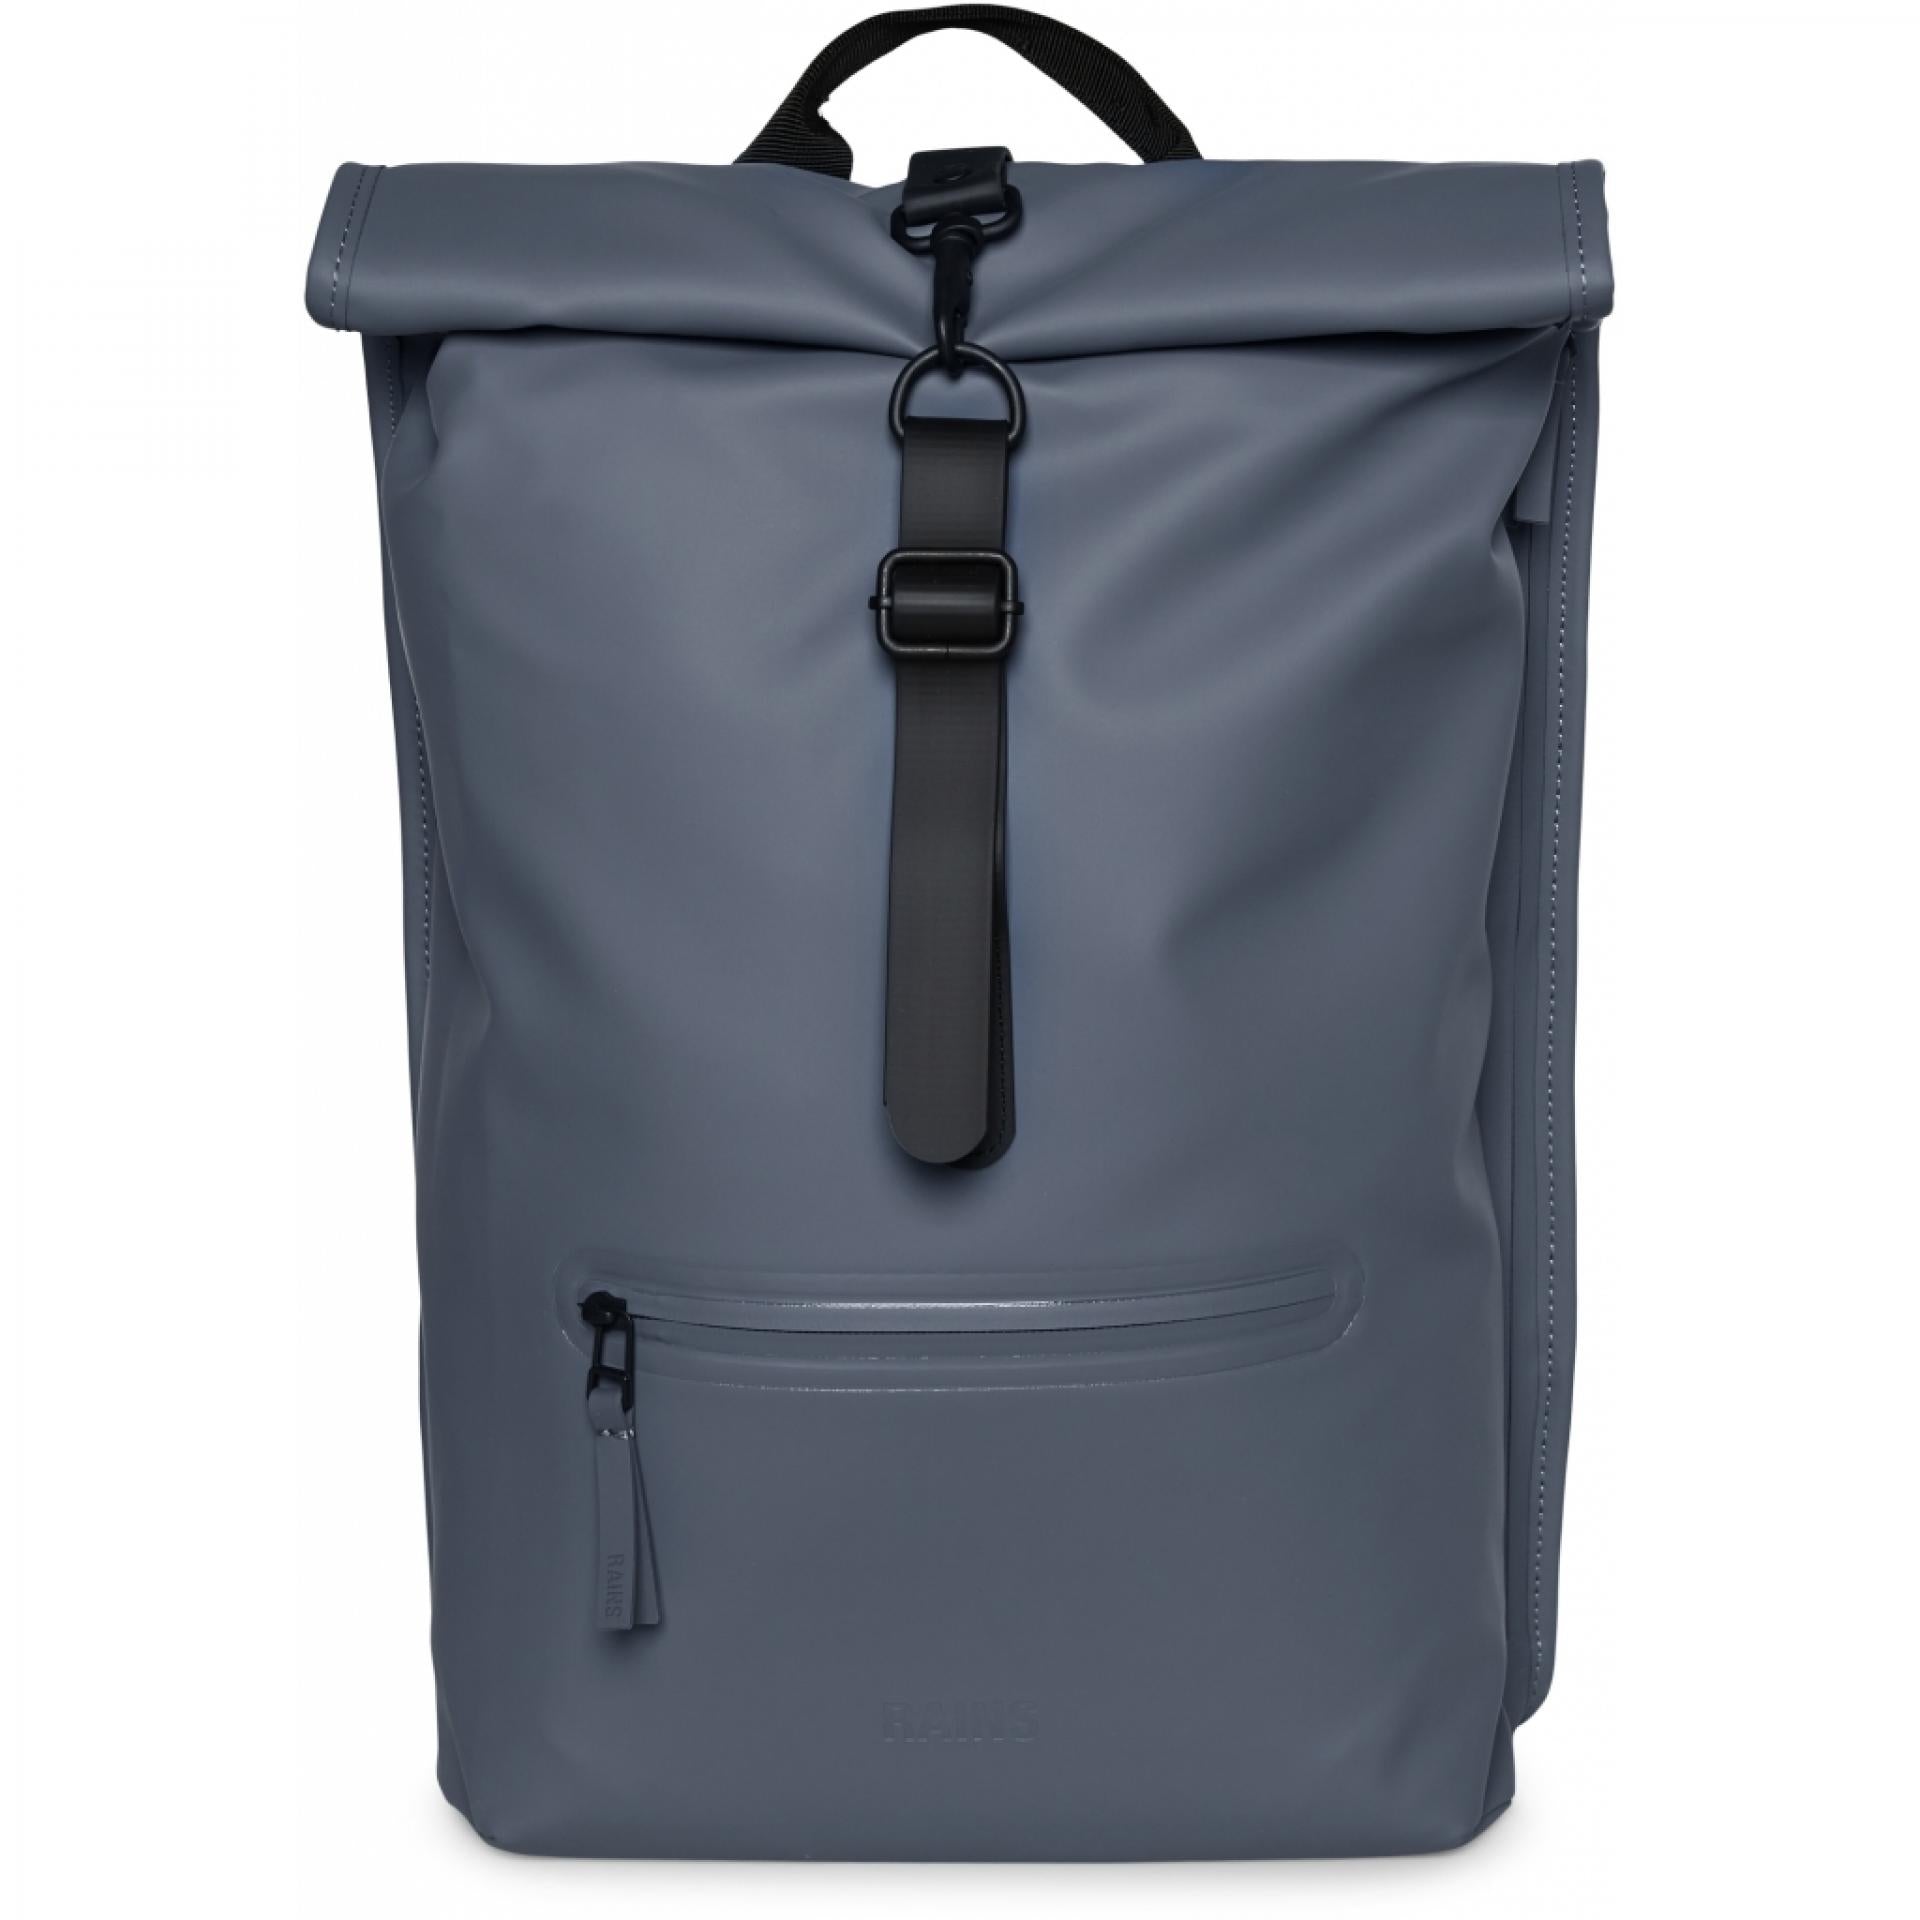 Rains Rolltop Rucksack 68 River One Size